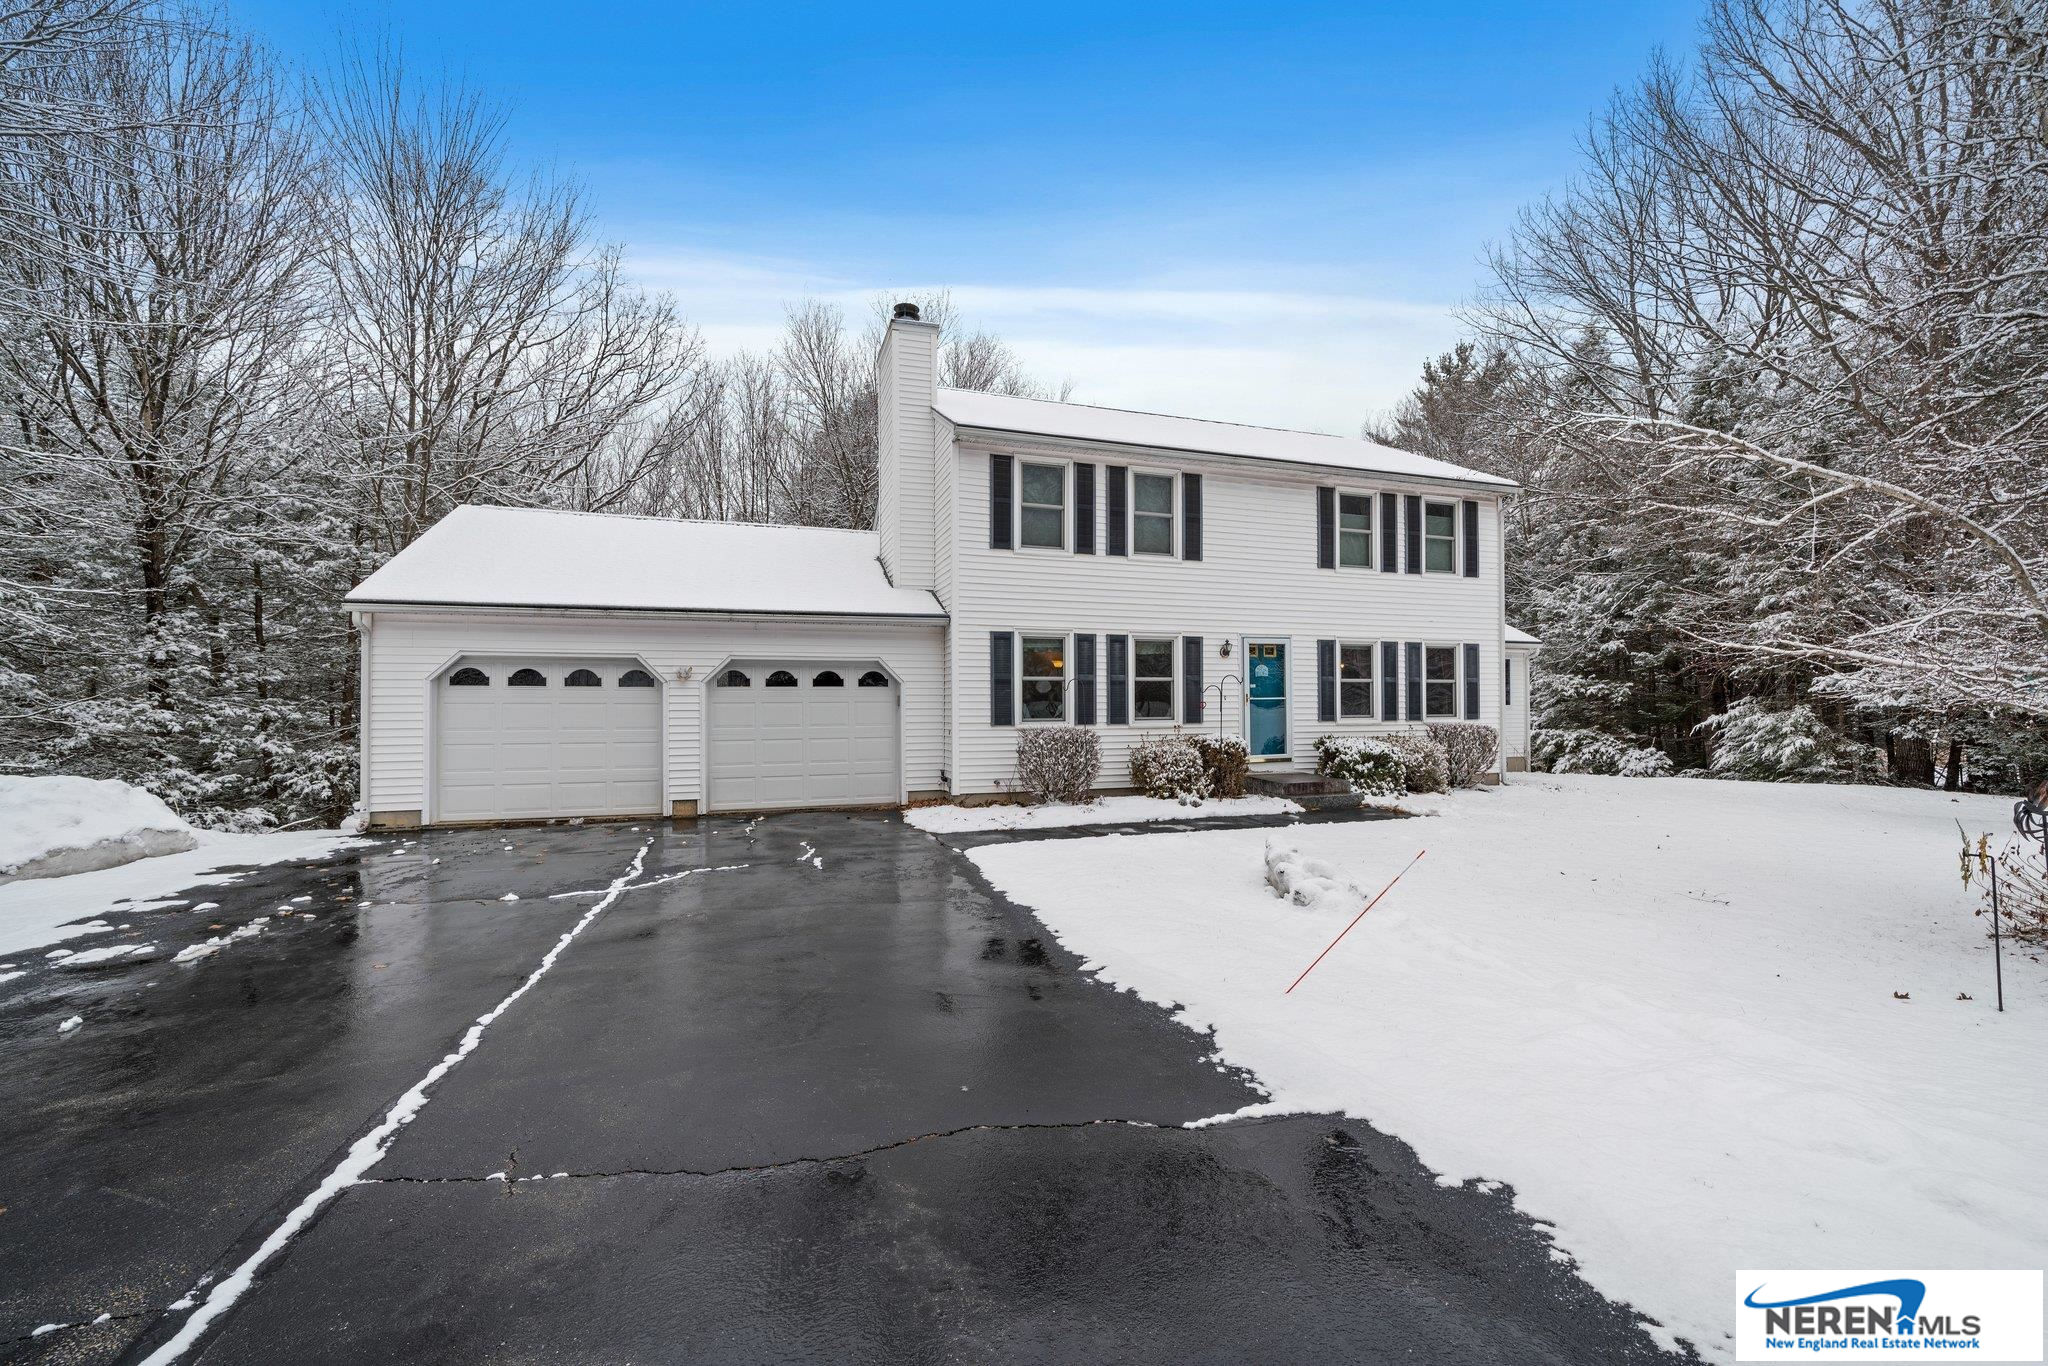 12 Ginger Drive, Goffstown, NH 03045